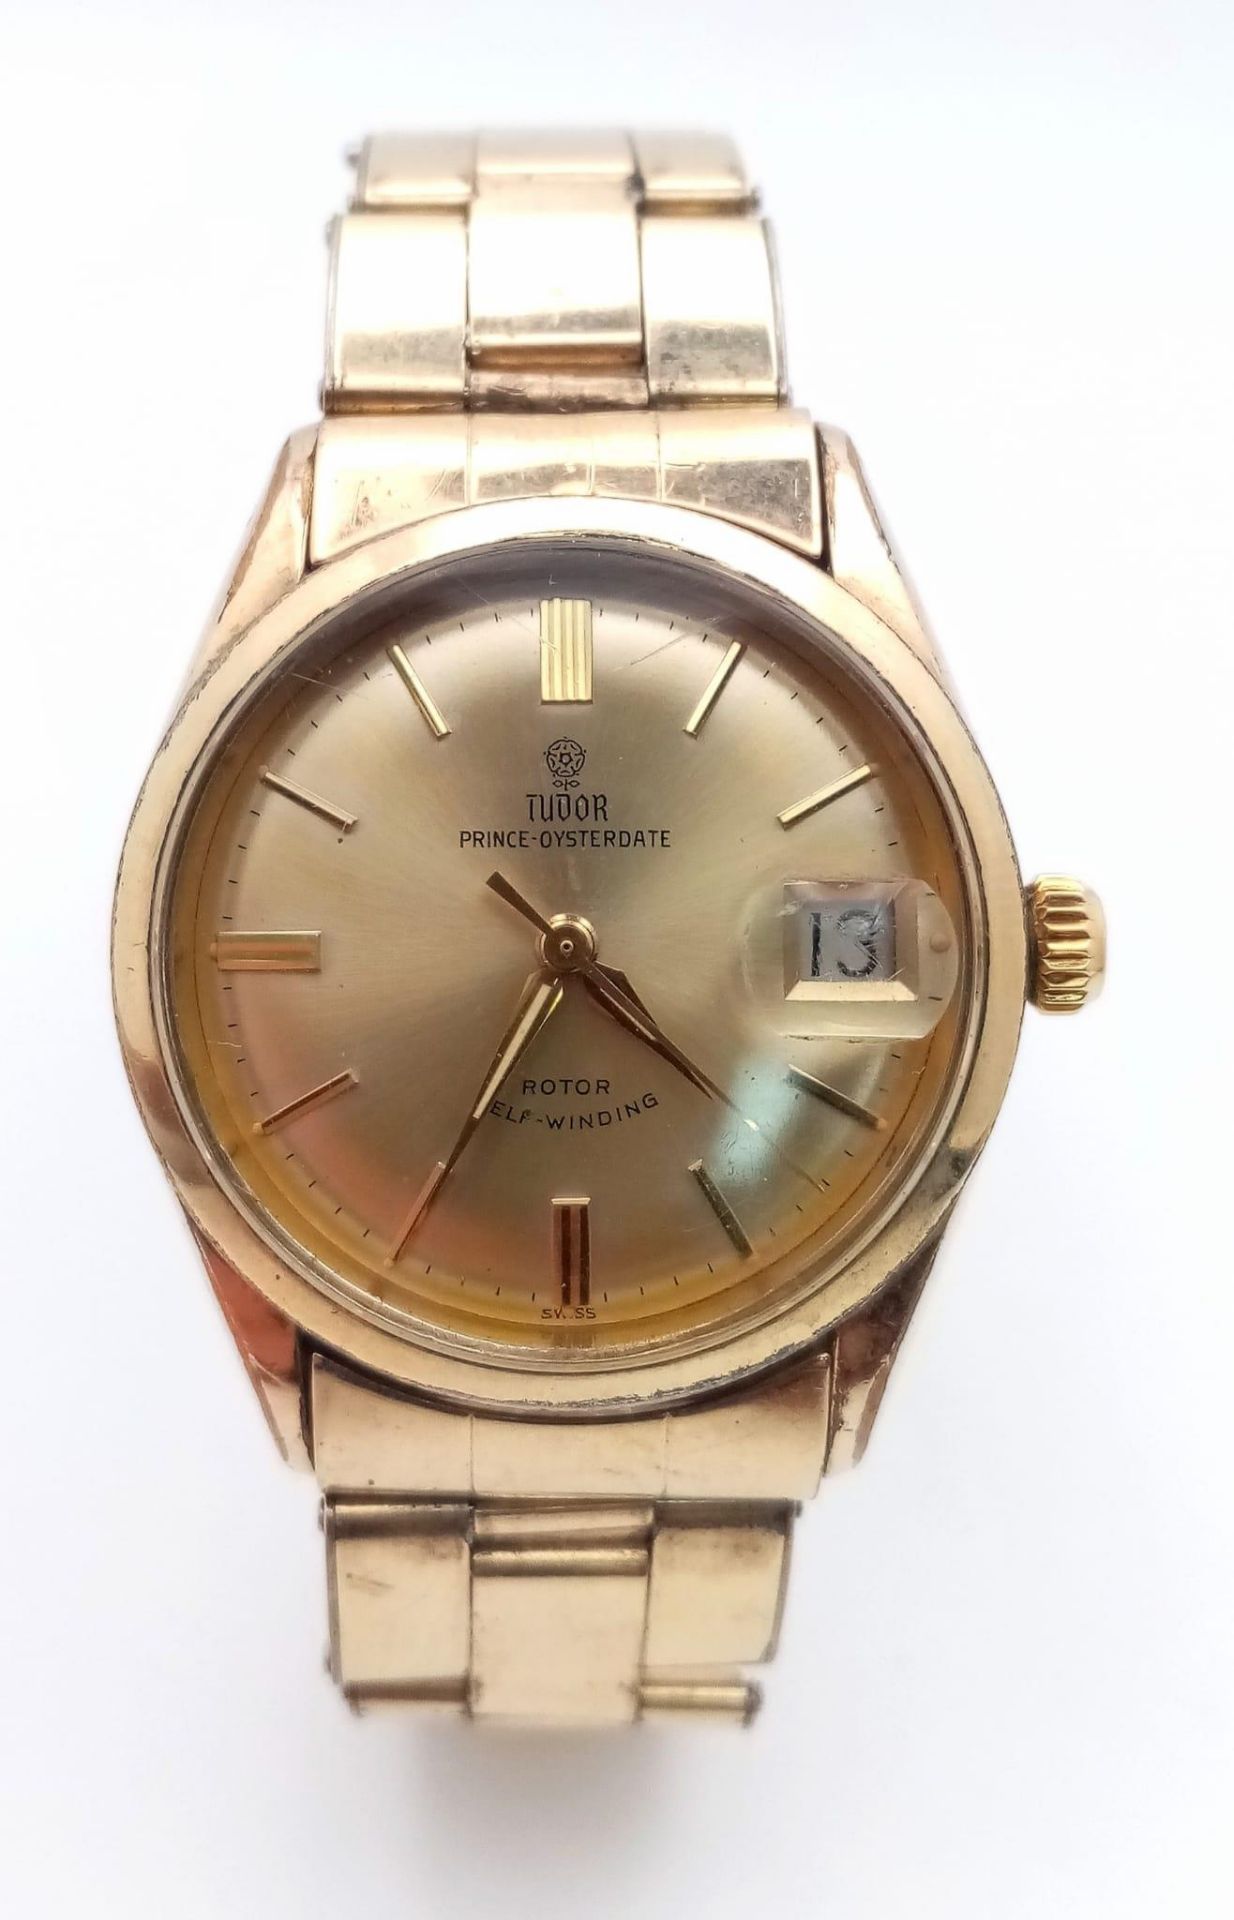 A Vintage Tudor Prince Oysterdate Gents Watch. Gold plated bracelet and case - 34mm. Gold tone